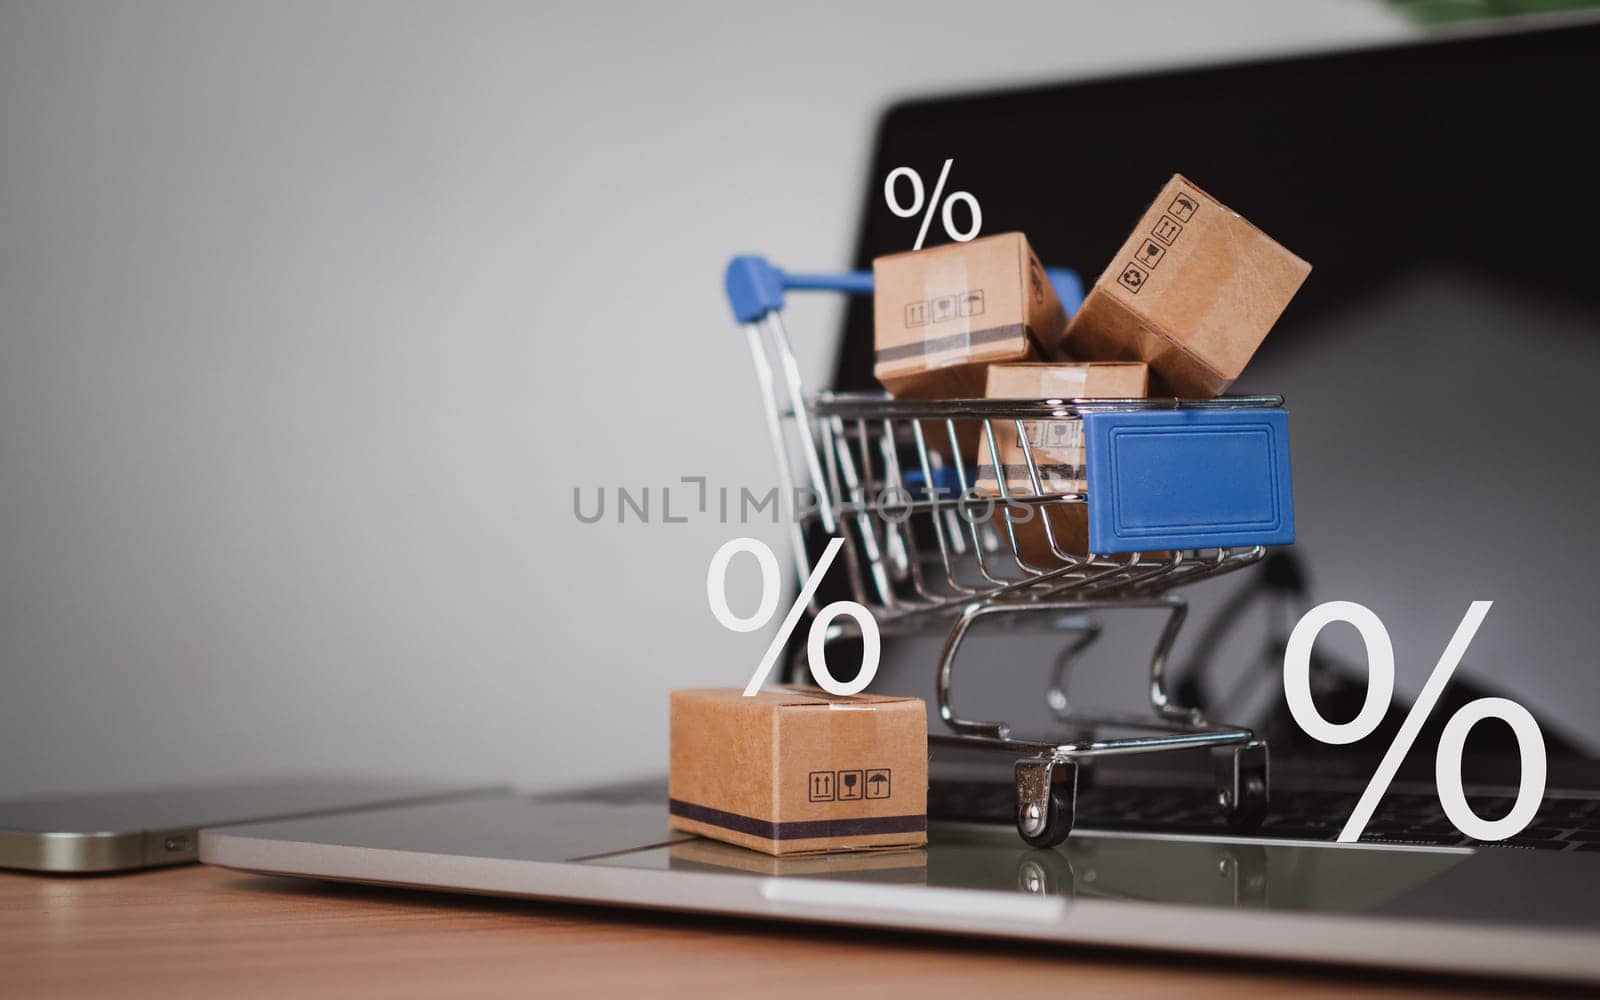 Sale percentage with shopping cart and boxes placed on computer keyboard. Online shopping concept, special price products, Special offers and promotions